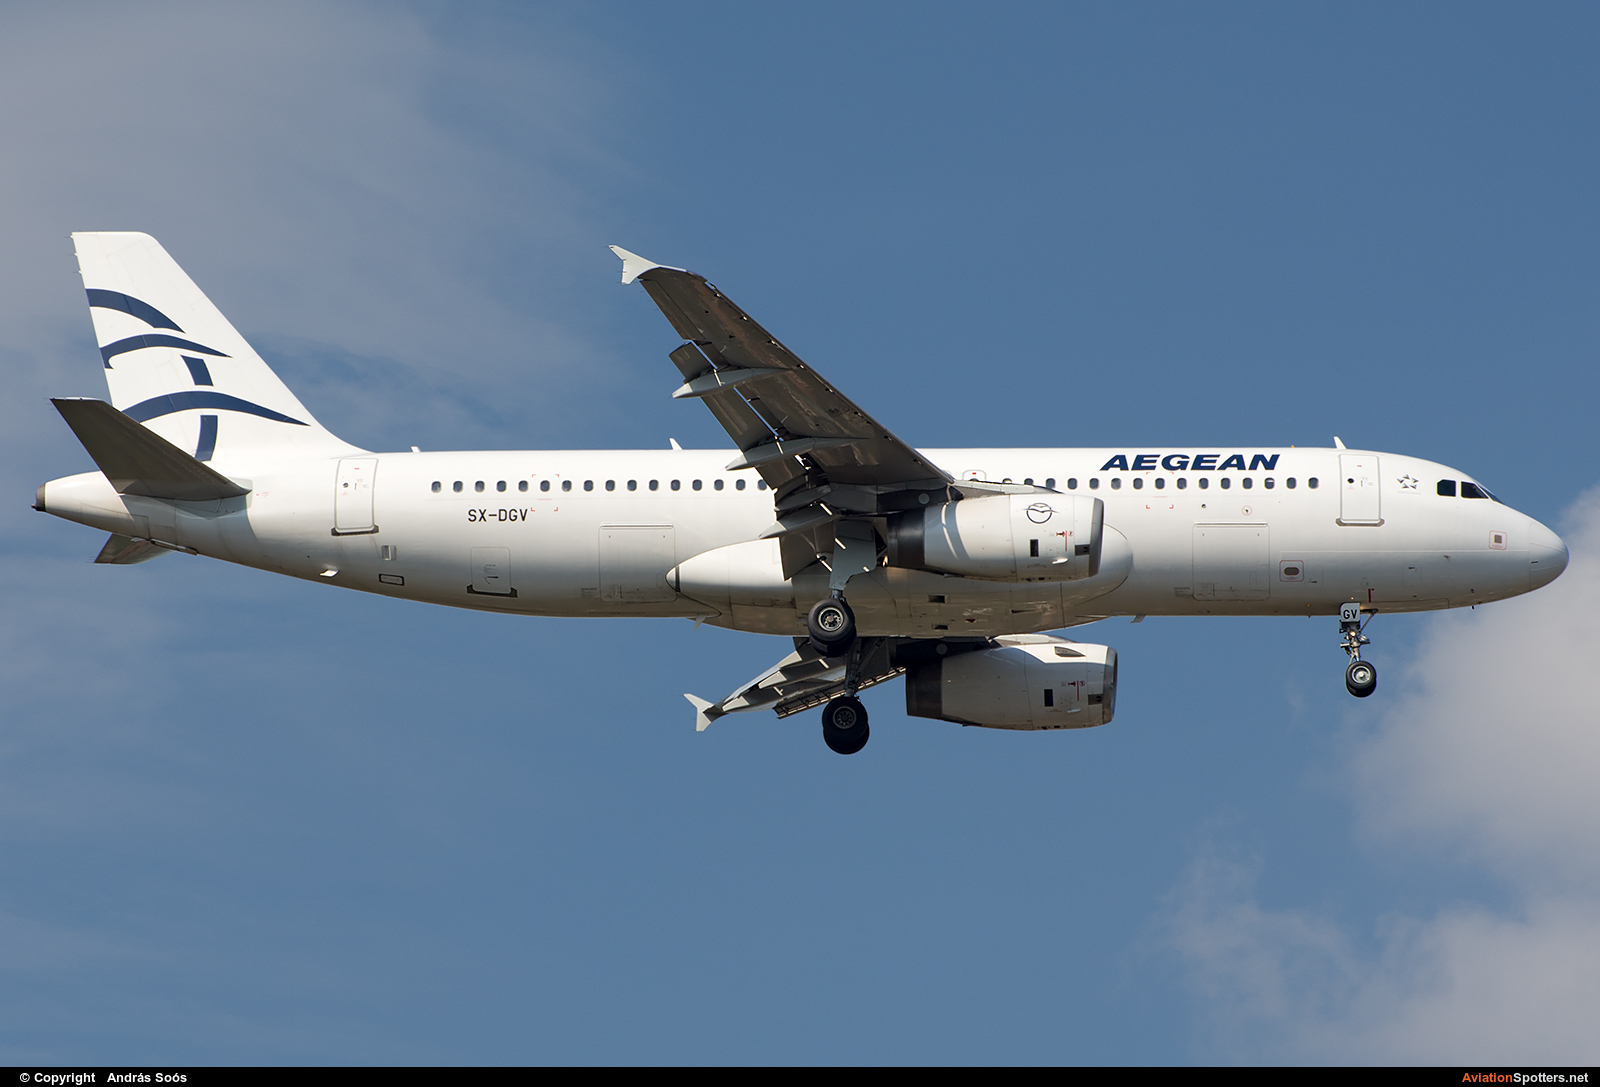 Aegean Airlines  -  A320-232  (SX-DGV) By András Soós (sas1965)